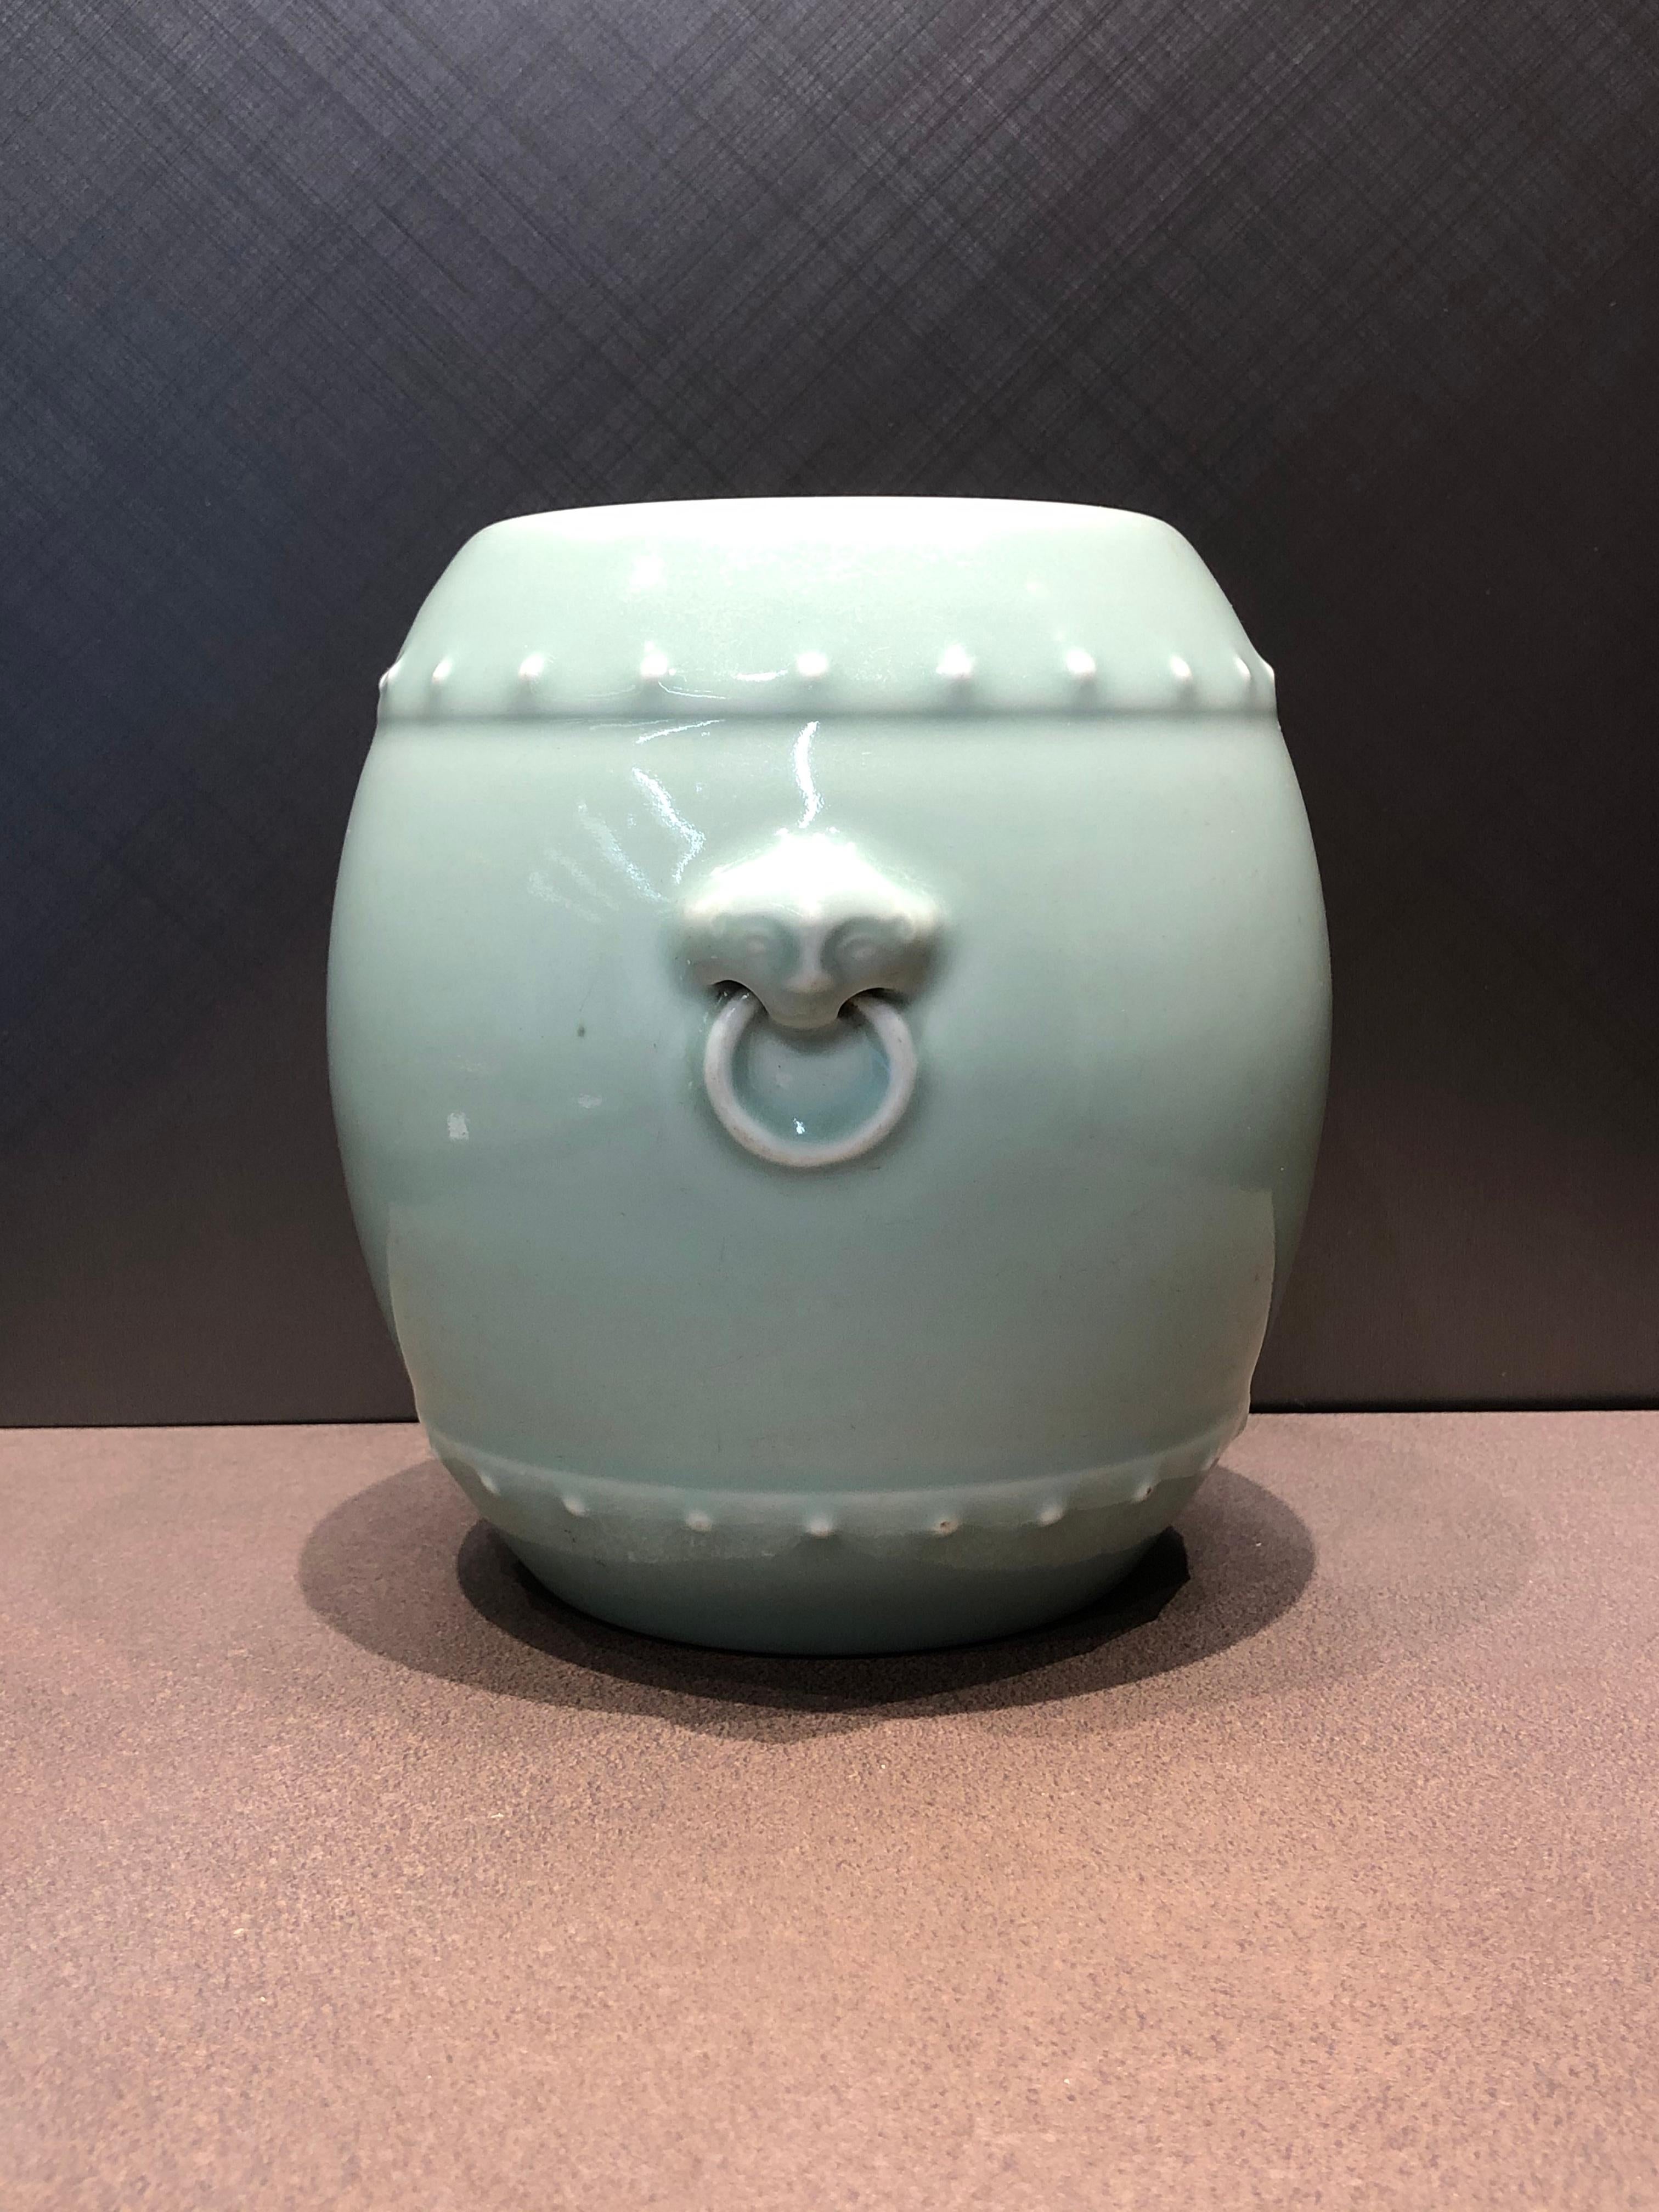 Made in Jingdezhen during the reign of the Qianlong Emperor in the Qing Dynasty, the highest grade of pottery made under strict control.

With a signature on the bottom dated to the year of the Qianlong Emperor of the Qing Dynasty

The piece is